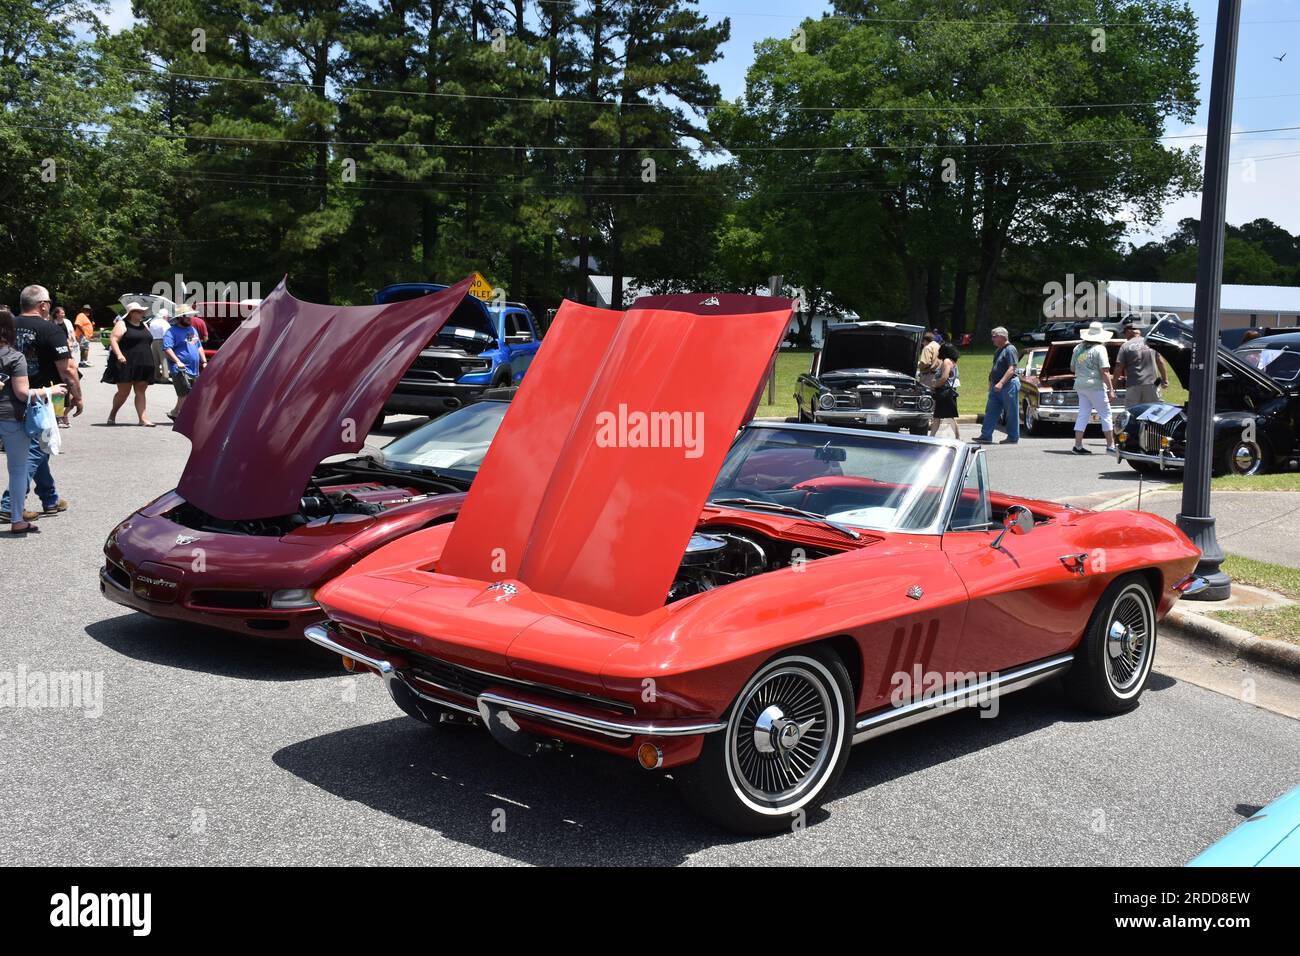 A 1965 Red C2 Chevrolet Corvette Convertible on display at a car show. Stock Photo